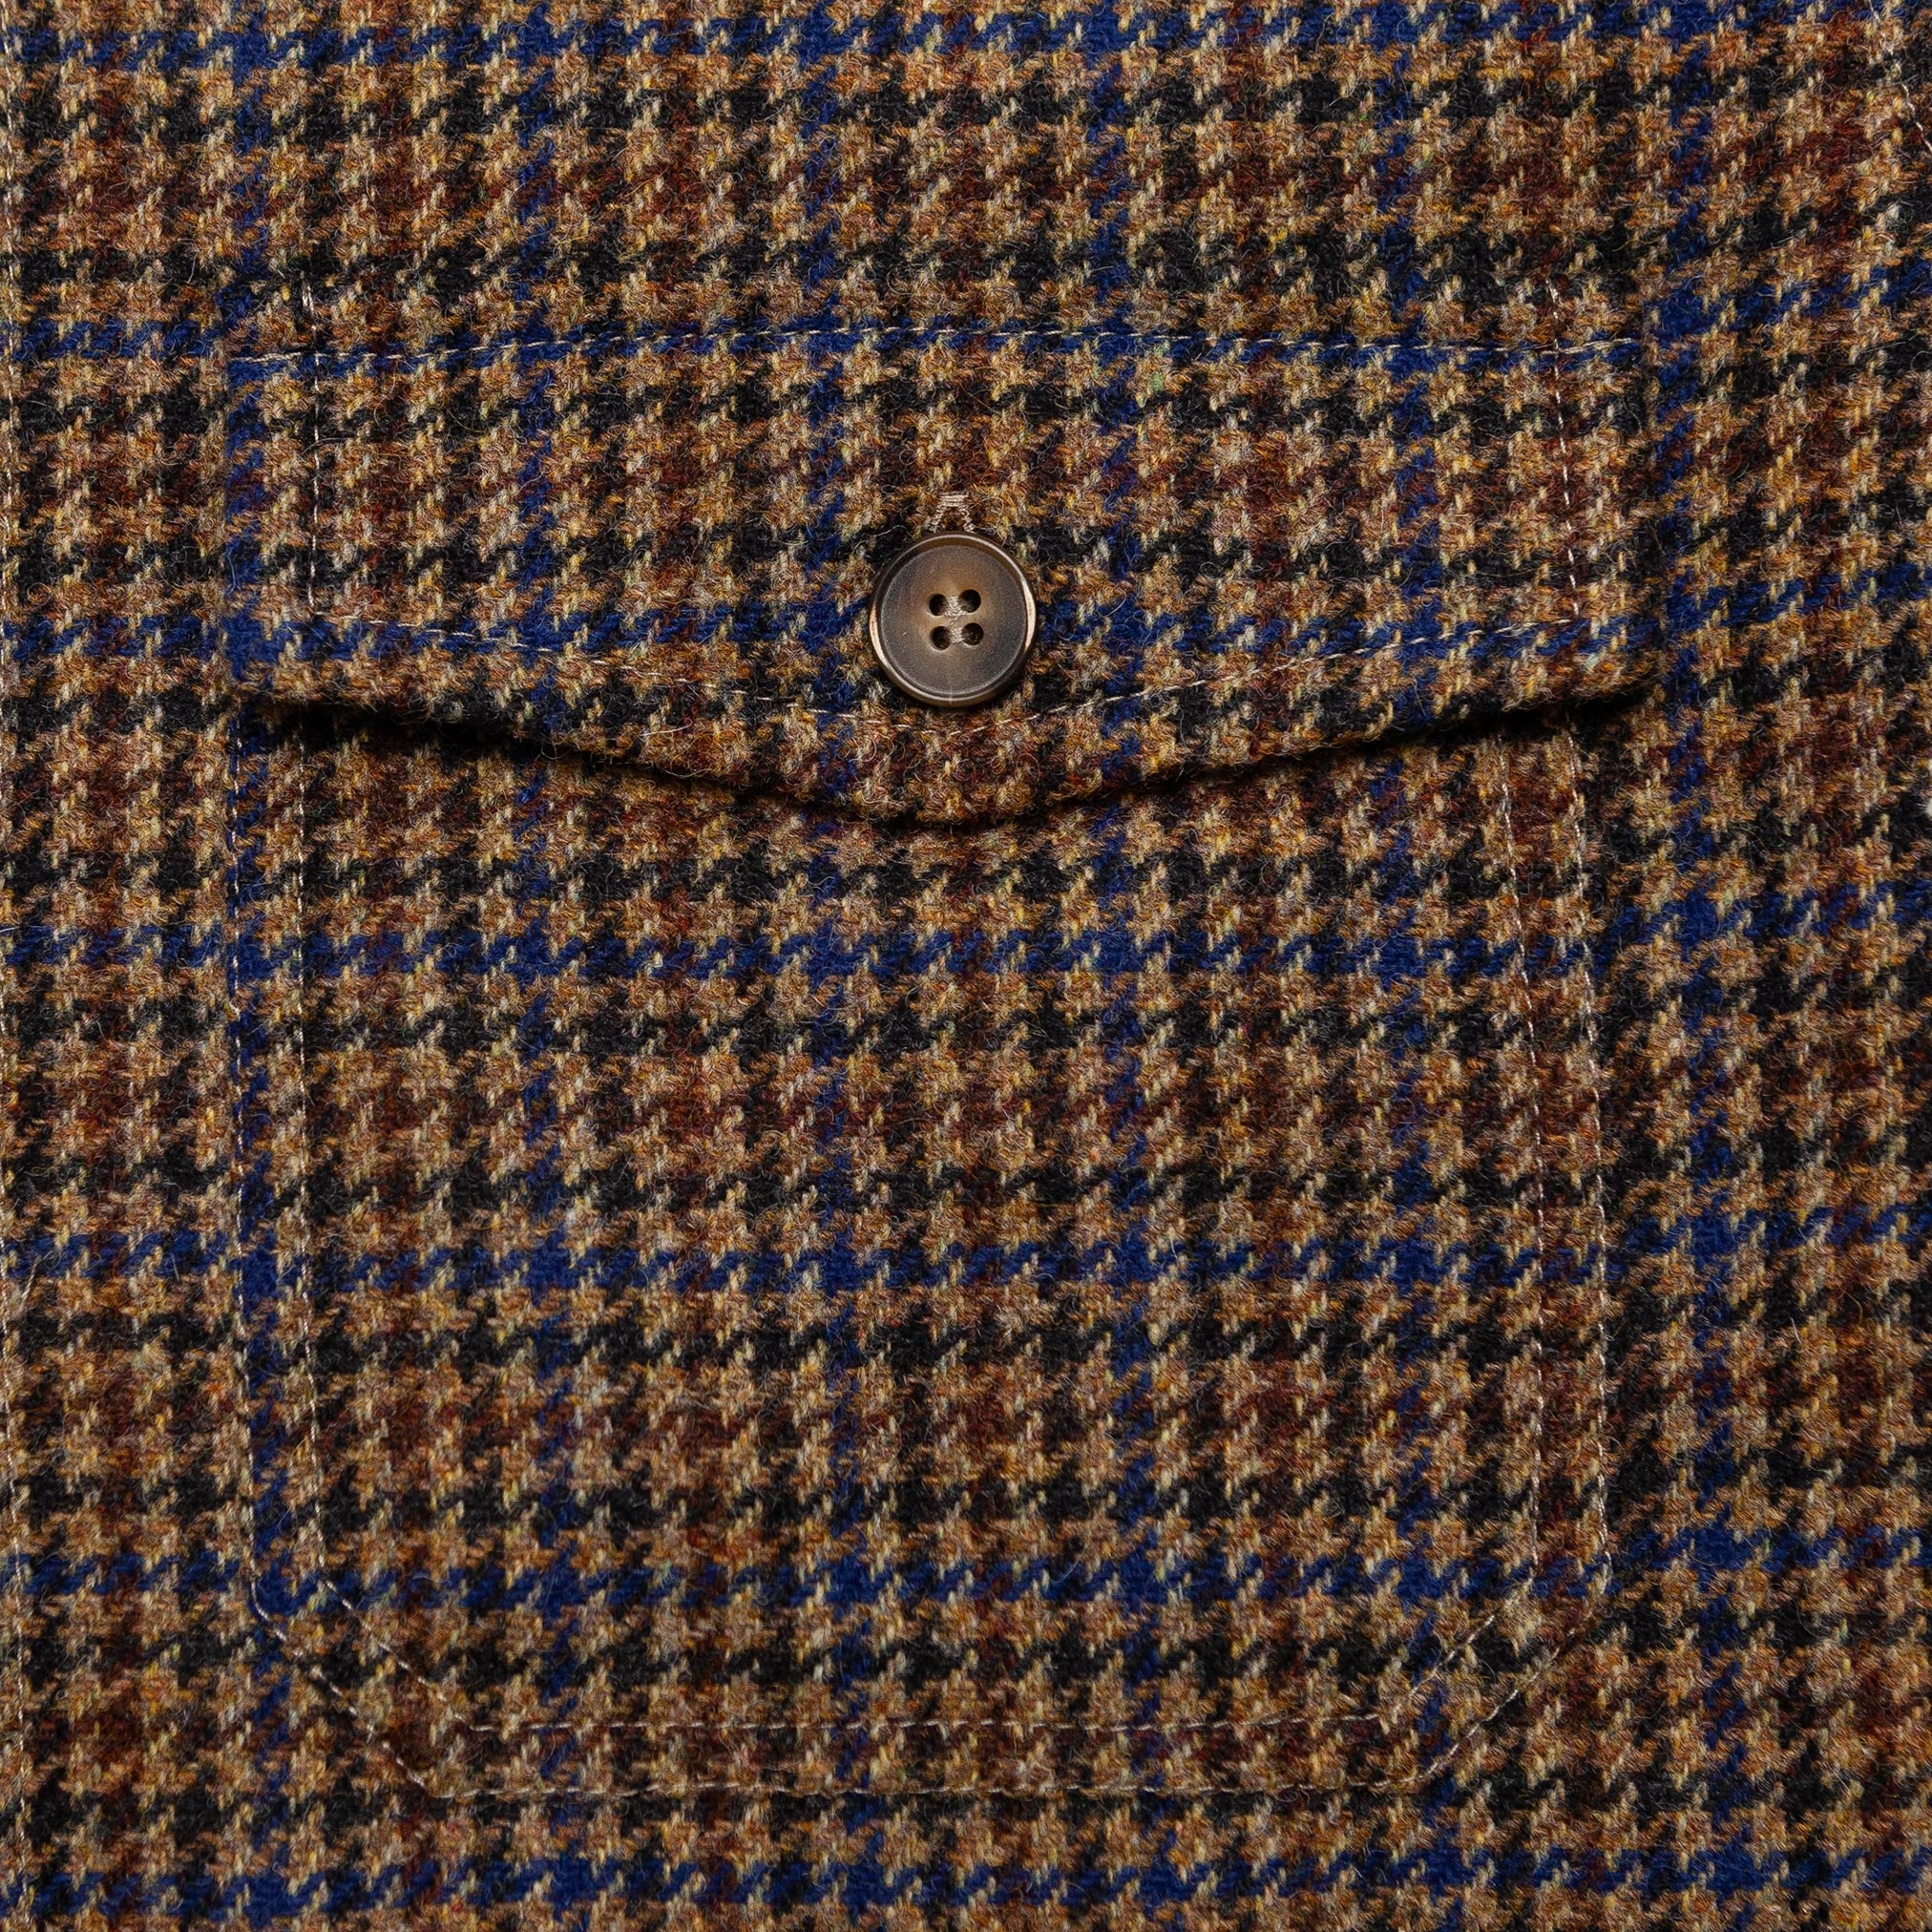 Lined Shirt Jacket in Brown & Blue Houndstooth